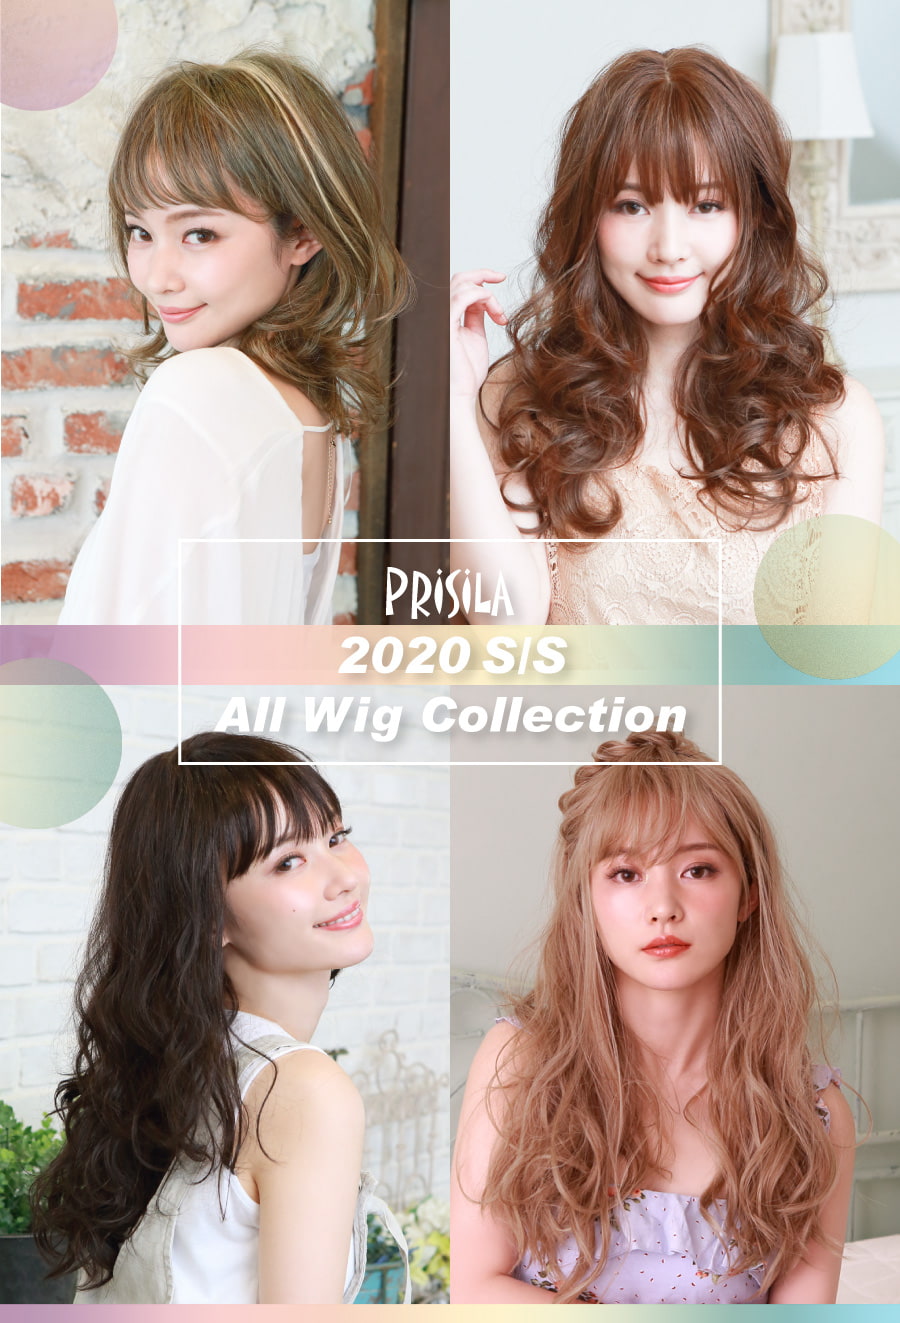 Prisila 2020 S/S All Wig Collection